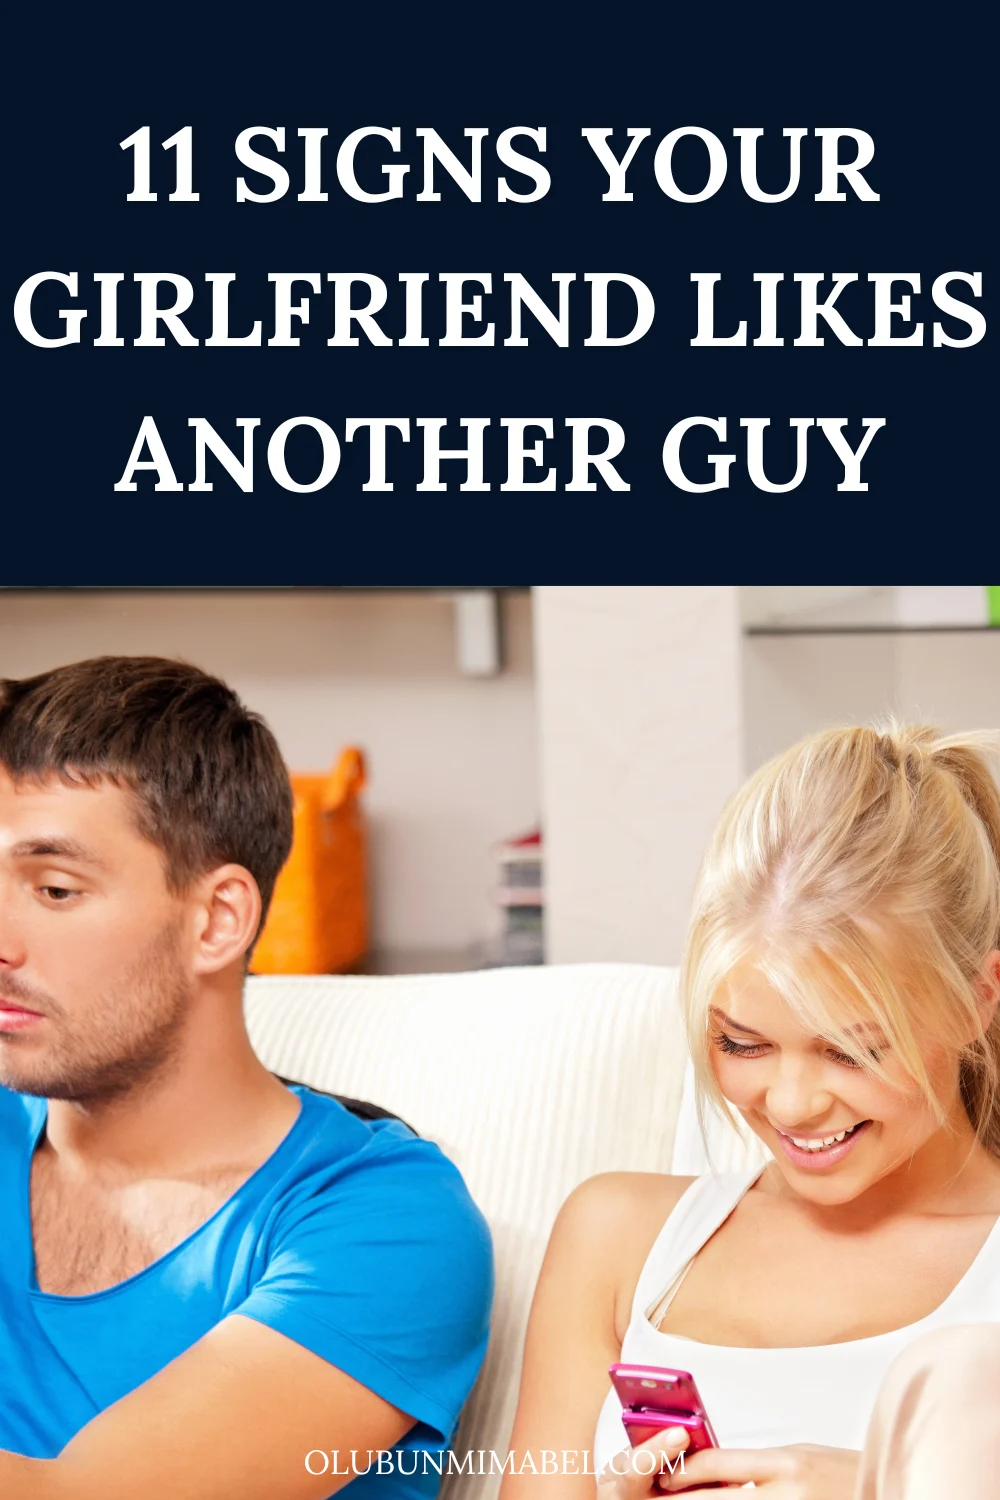 Signs Your Girlfriend Likes Another Guy